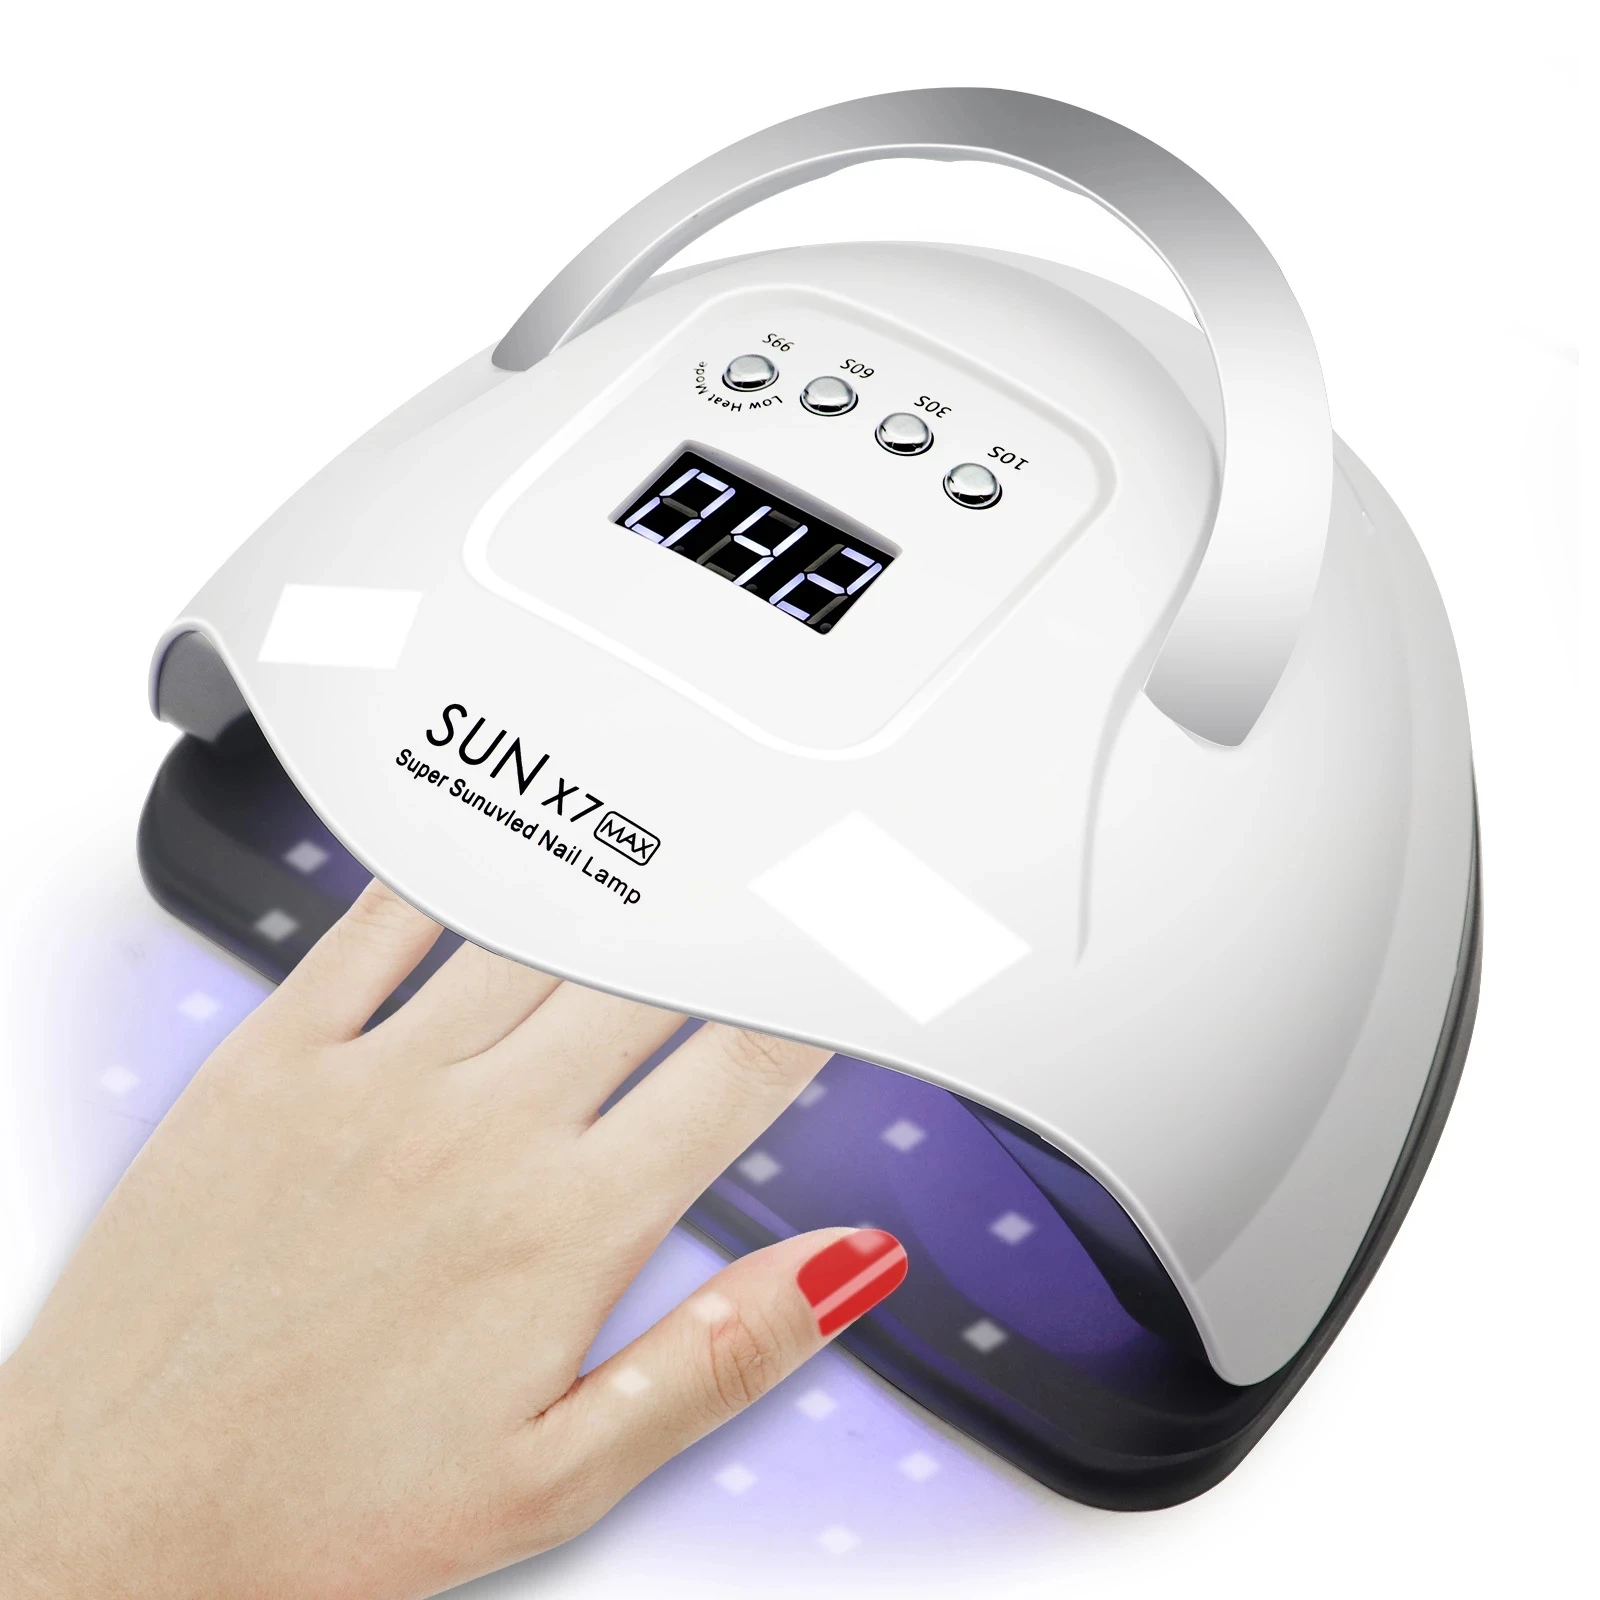 licht sociaal beoefenaar 180w Sun X7 Max Uv Led Lamp For Manicure Nail Lamps Dryer With Sensor Lcd  Display - Buy Sun X7 Max,Uv Led Nail Lamp,Sun X7 Max 180w Nail Lamp Product  on Alibaba.com